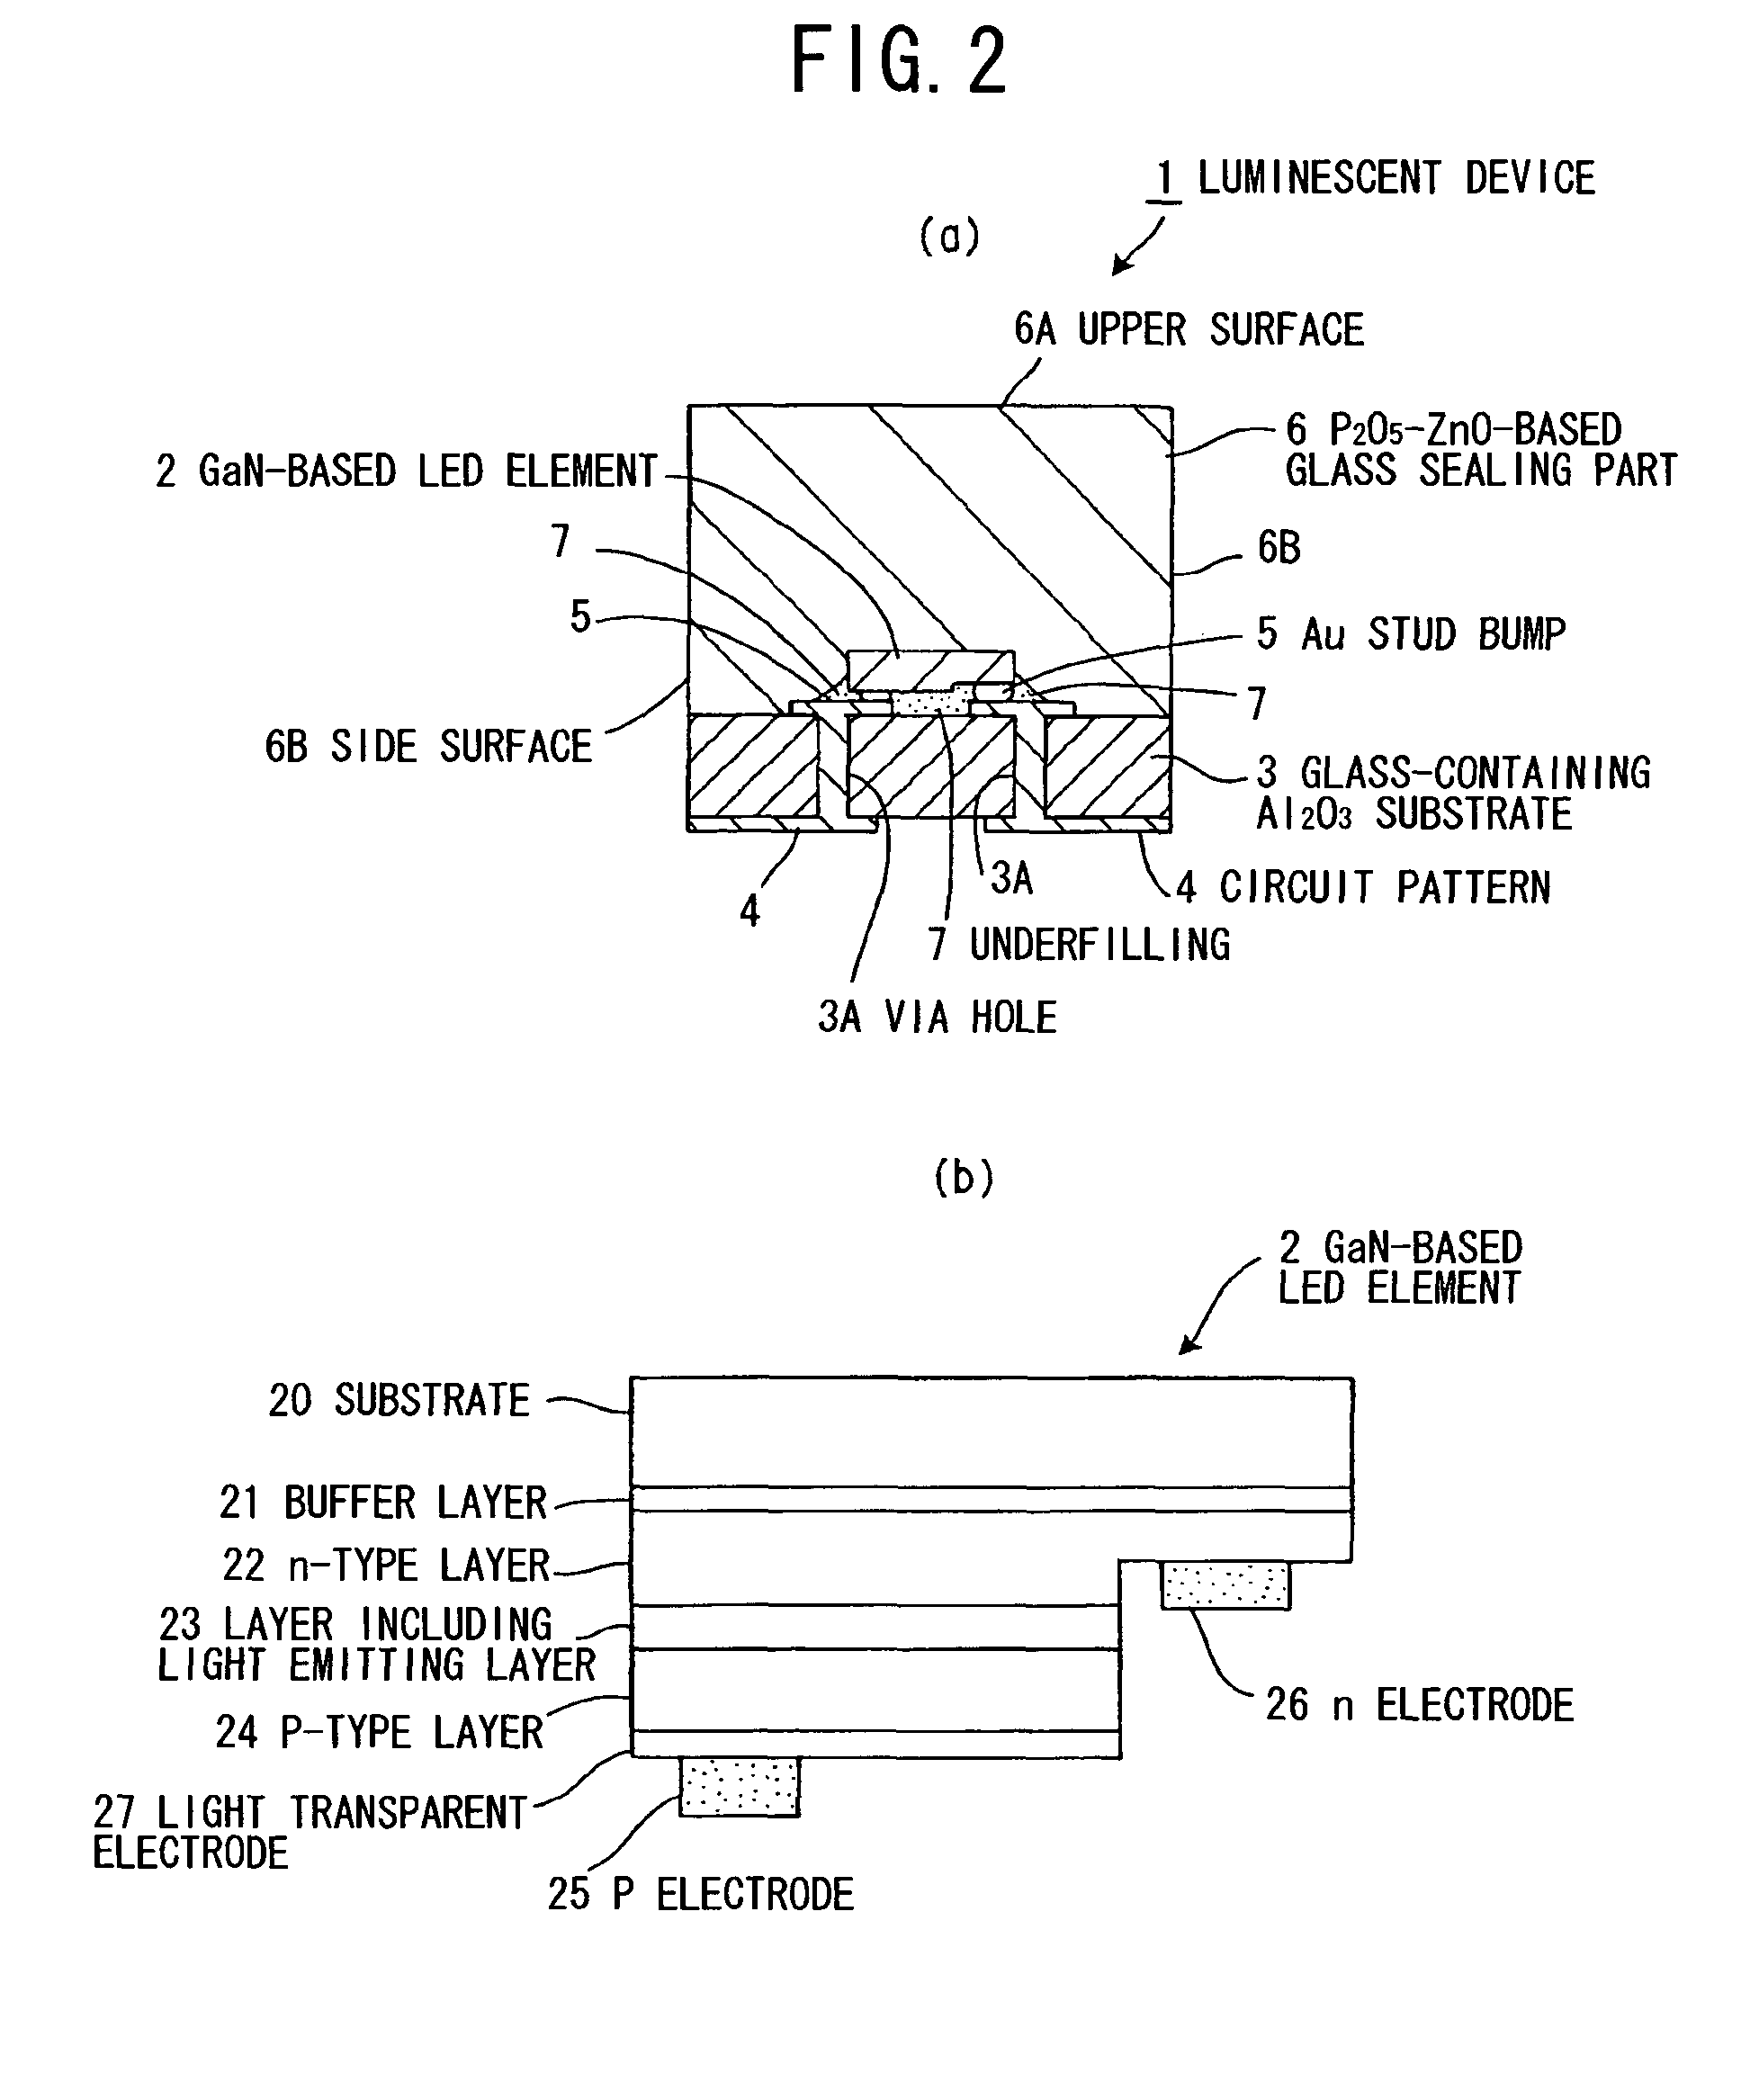 Solid element device and method for manufacturing the same